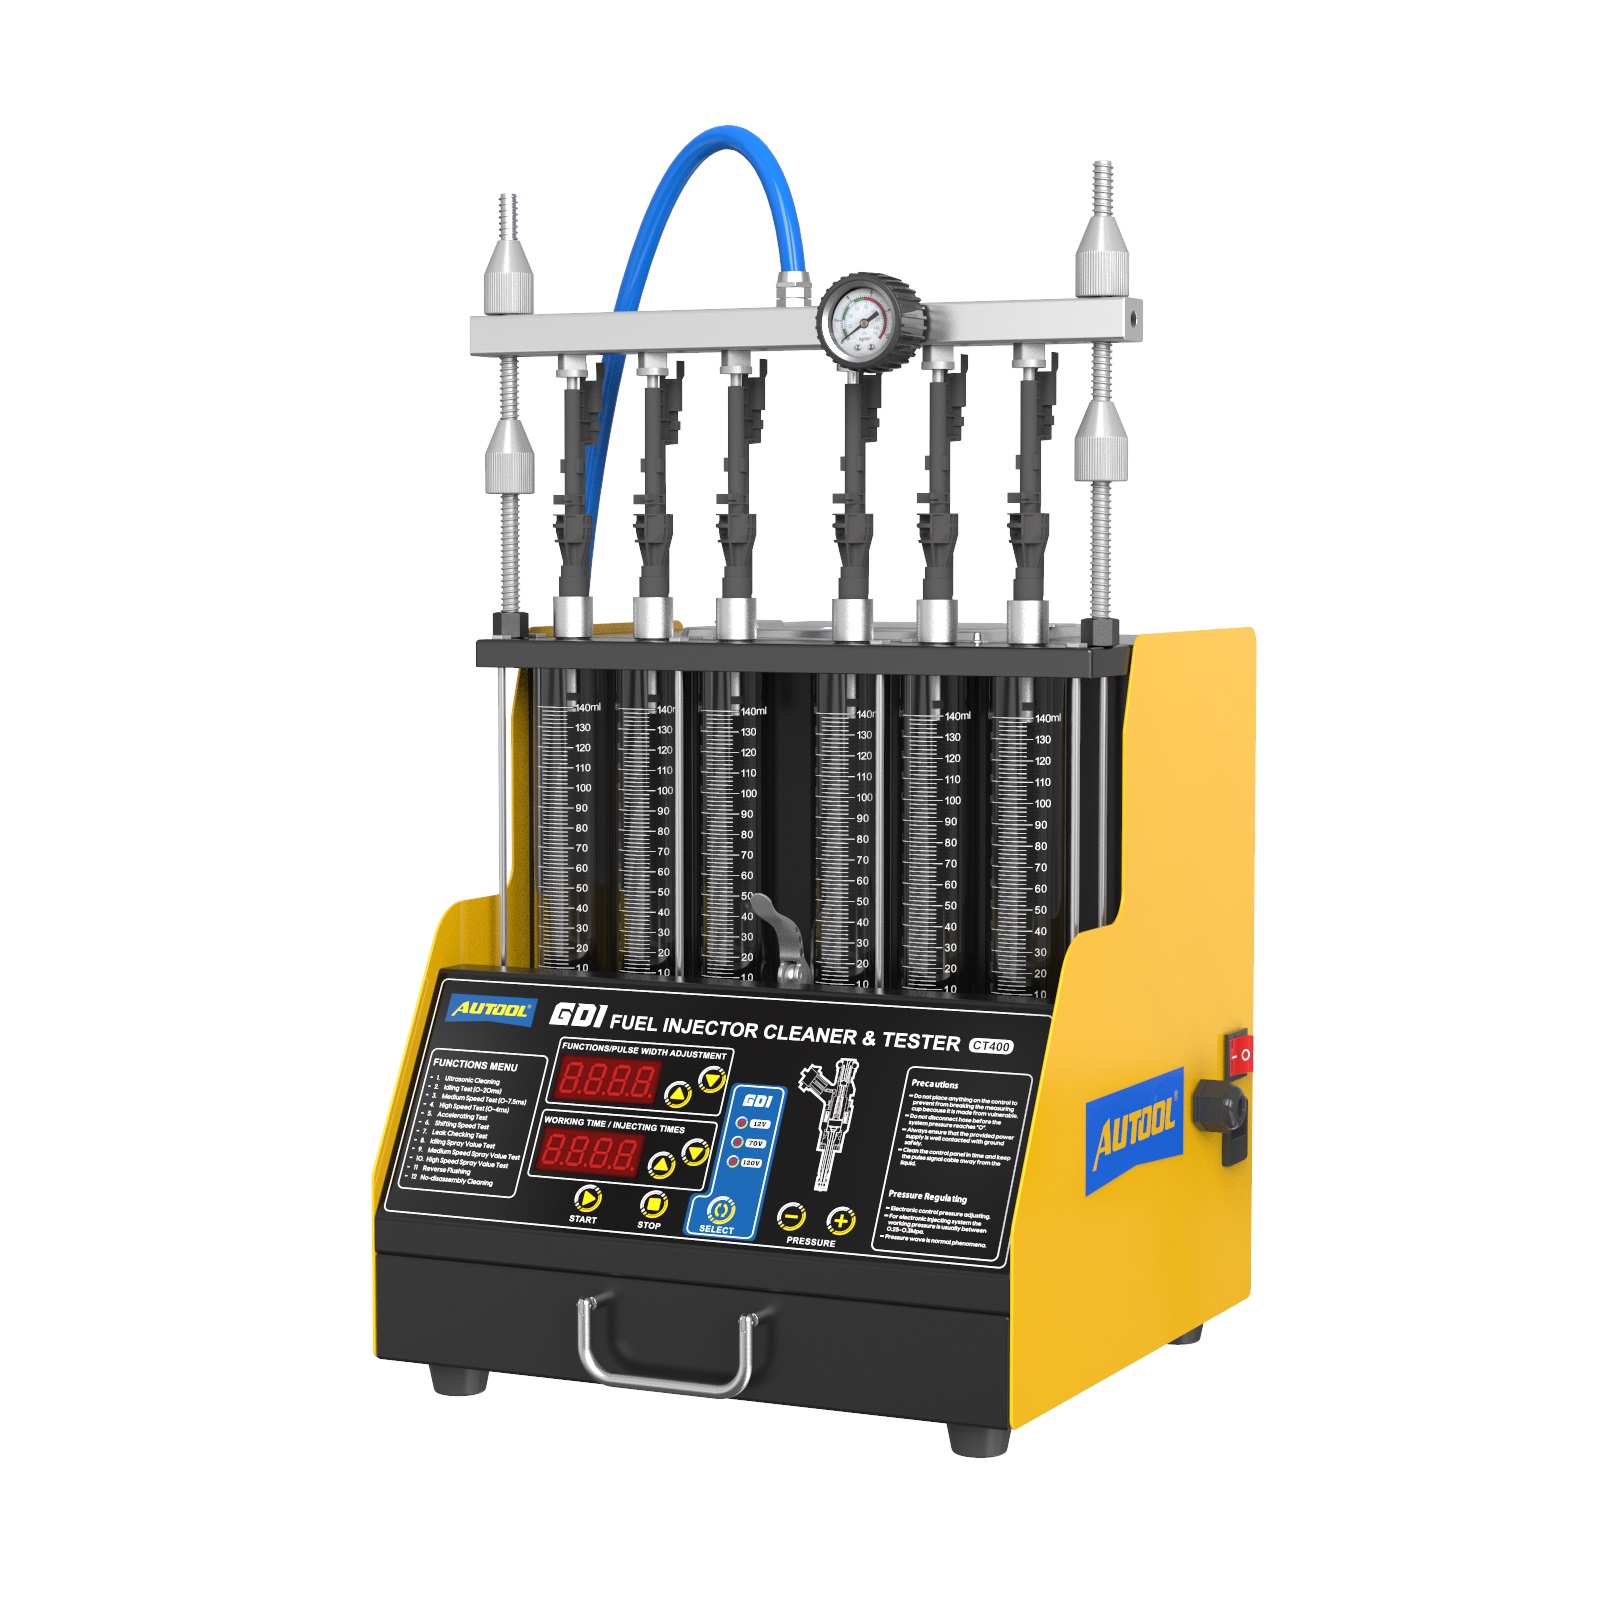 PFI Injector Cleaner & Tester » Toolwarehouse » Buy Tools Online